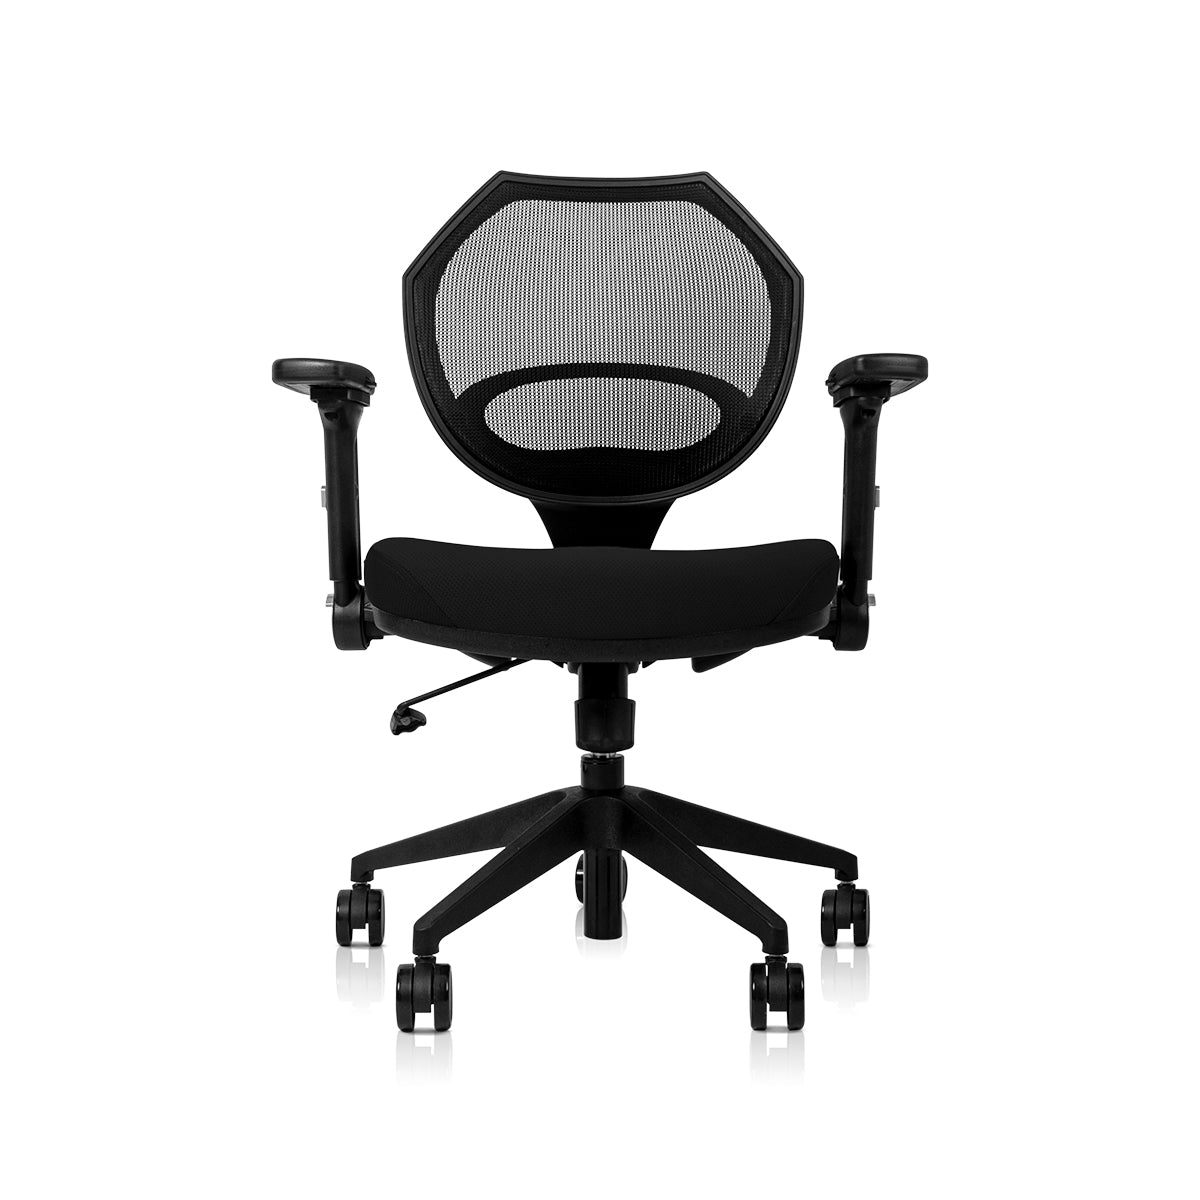 Voyager I™ Studio Chair